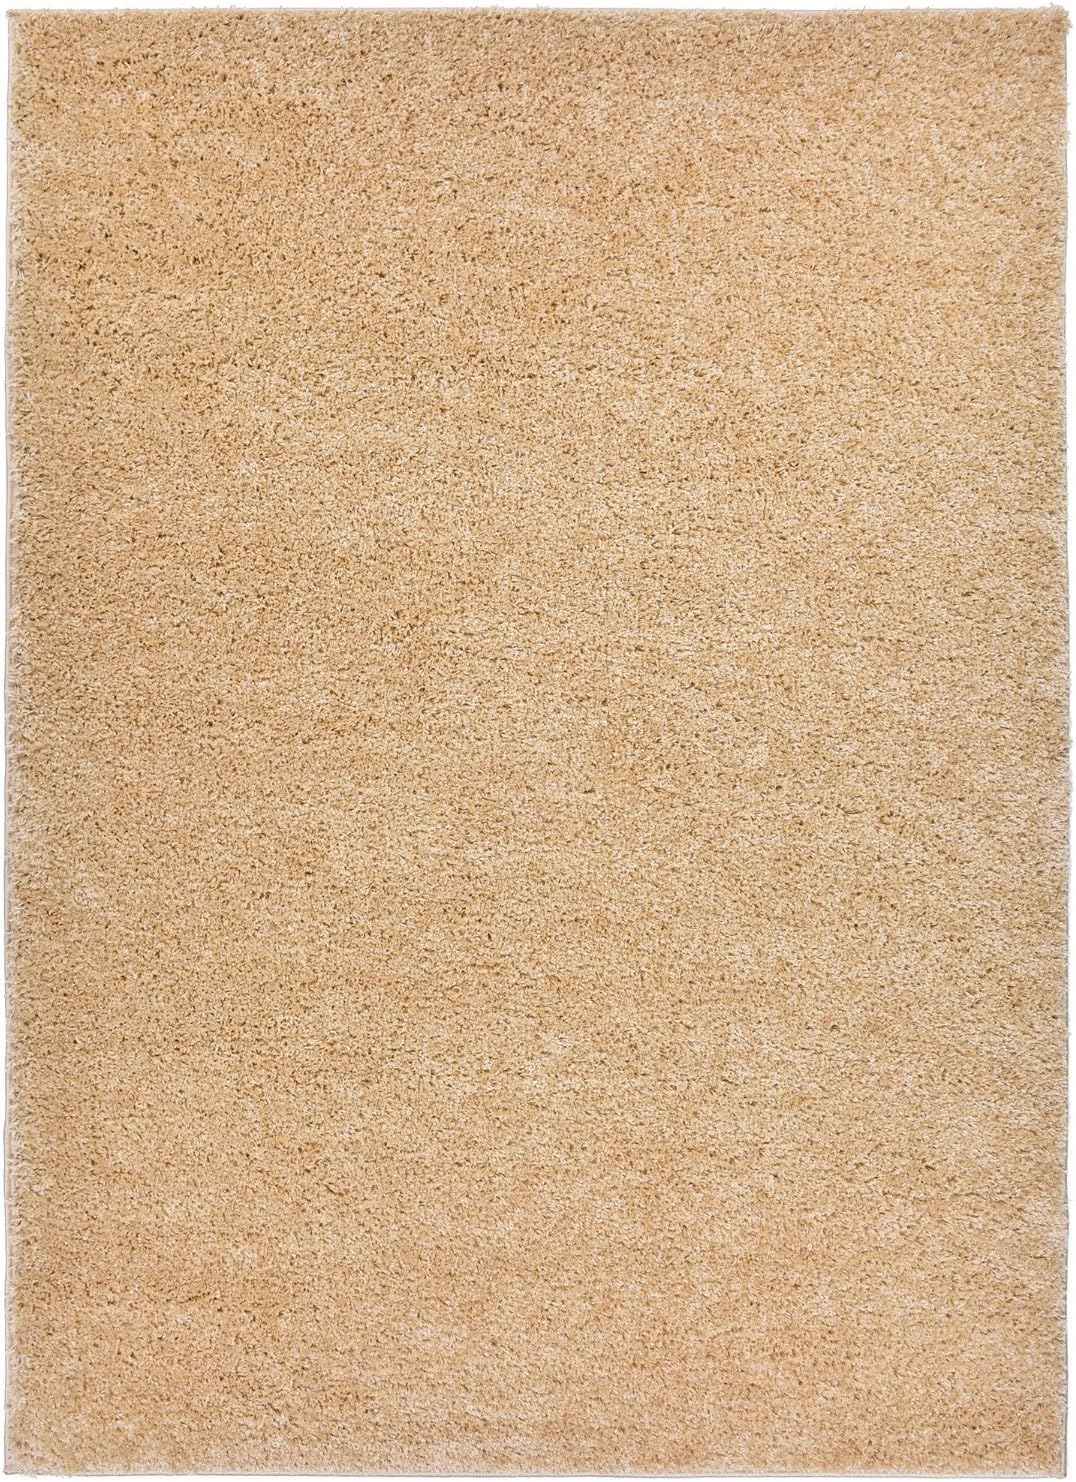 SOHO Shaggy Collection Solid Color Shag Area Rug (Beige, 8 x 10)-1